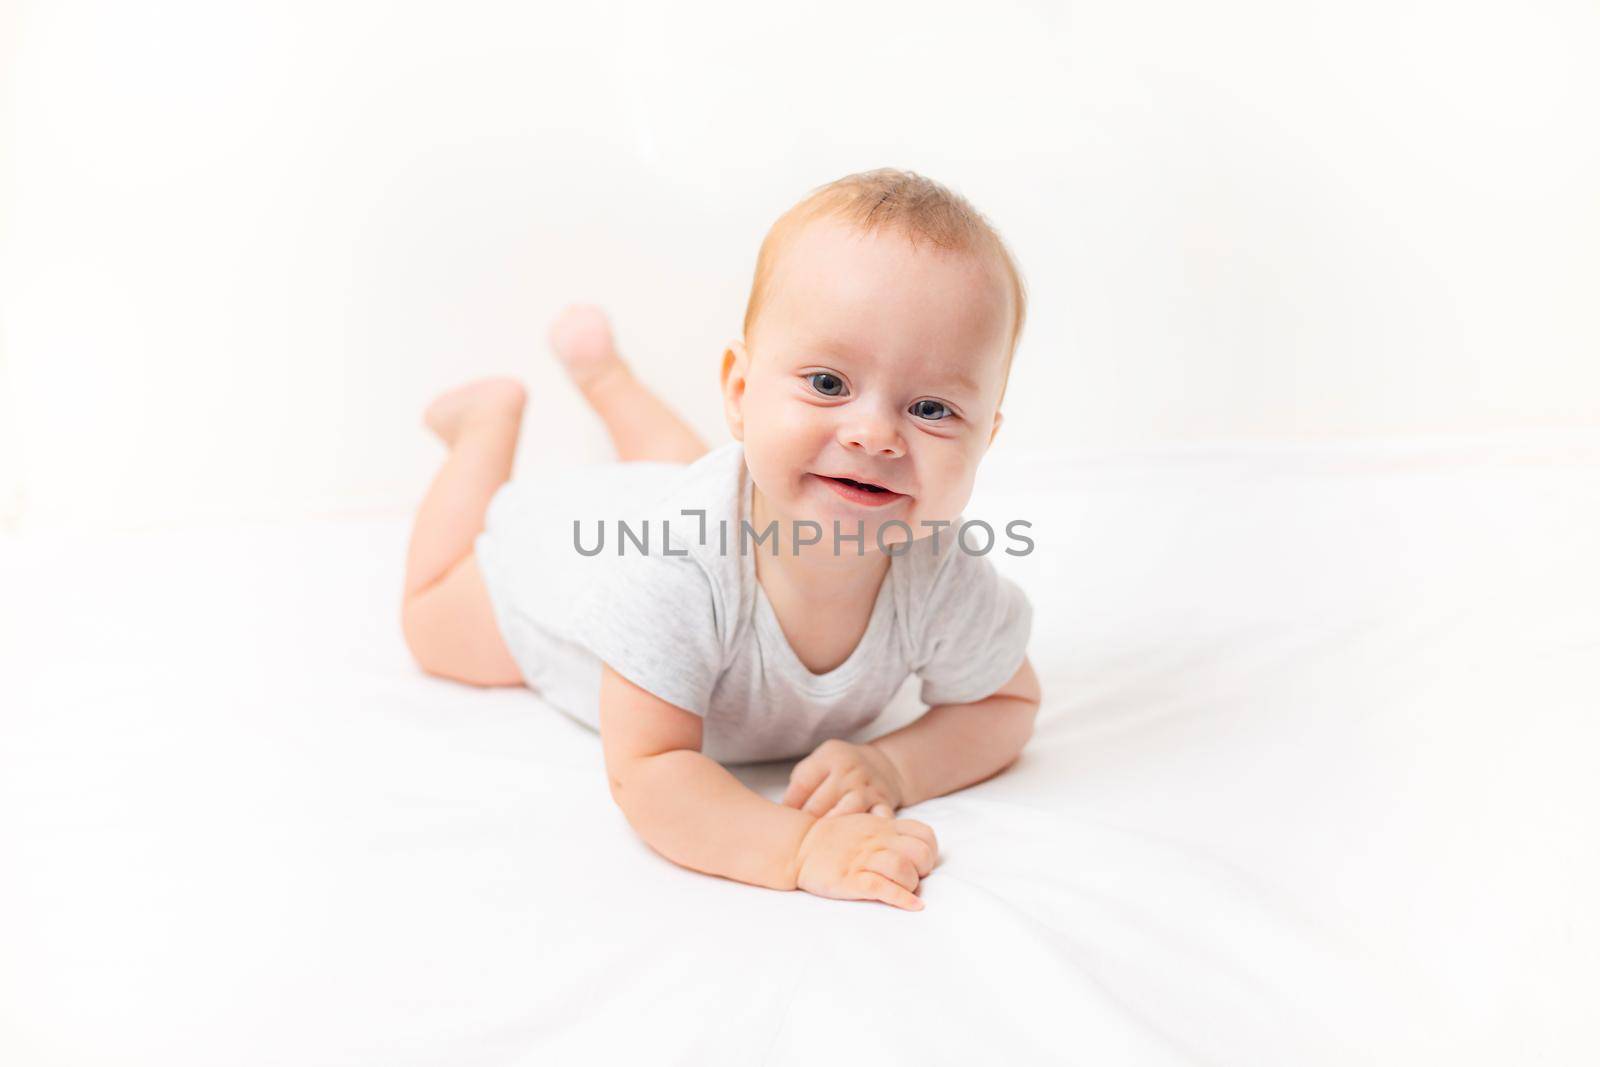 The baby lies on a white background and smiles at the camera . Advertising of children's goods. A child on a white background. Happy baby. The smile of a child. Children 's article . copy space